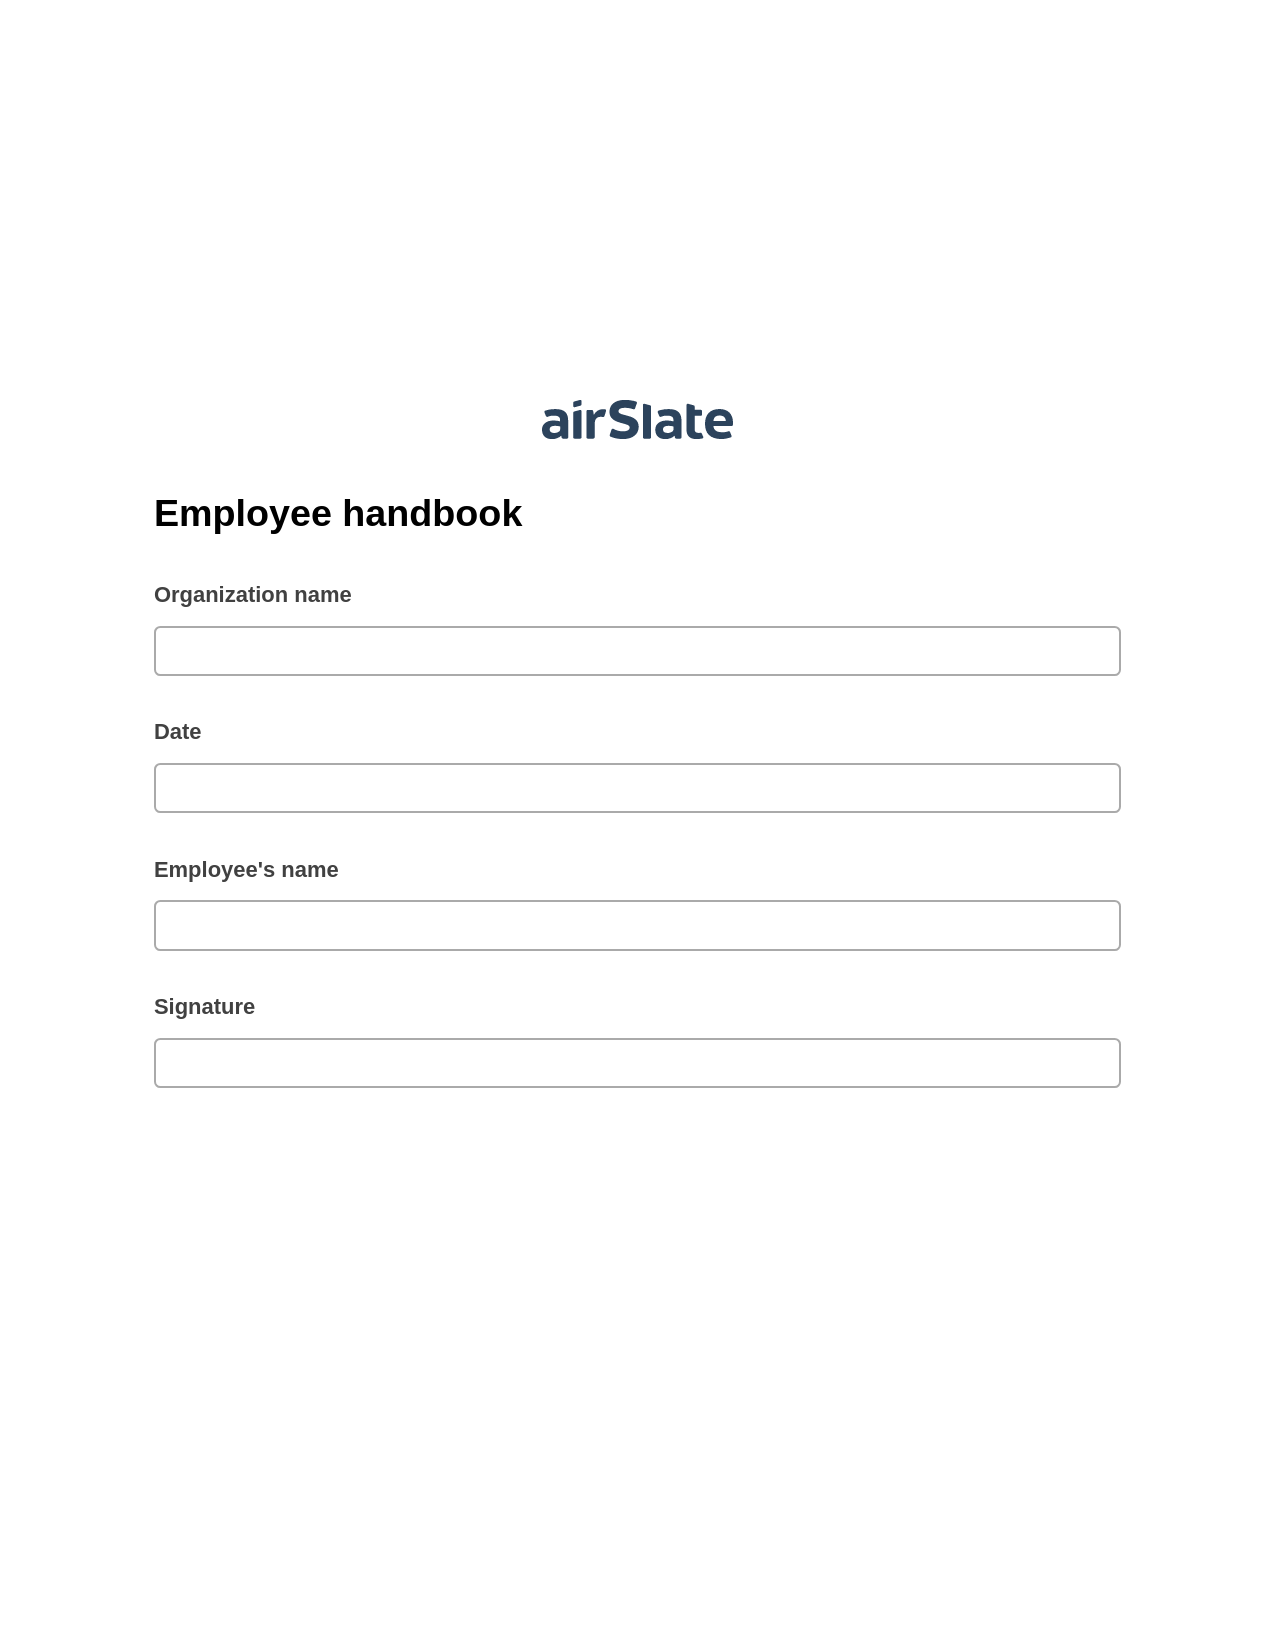 Employee handbook Pre-fill from CSV File Bot, Unassign Role Bot, Google Drive Bot